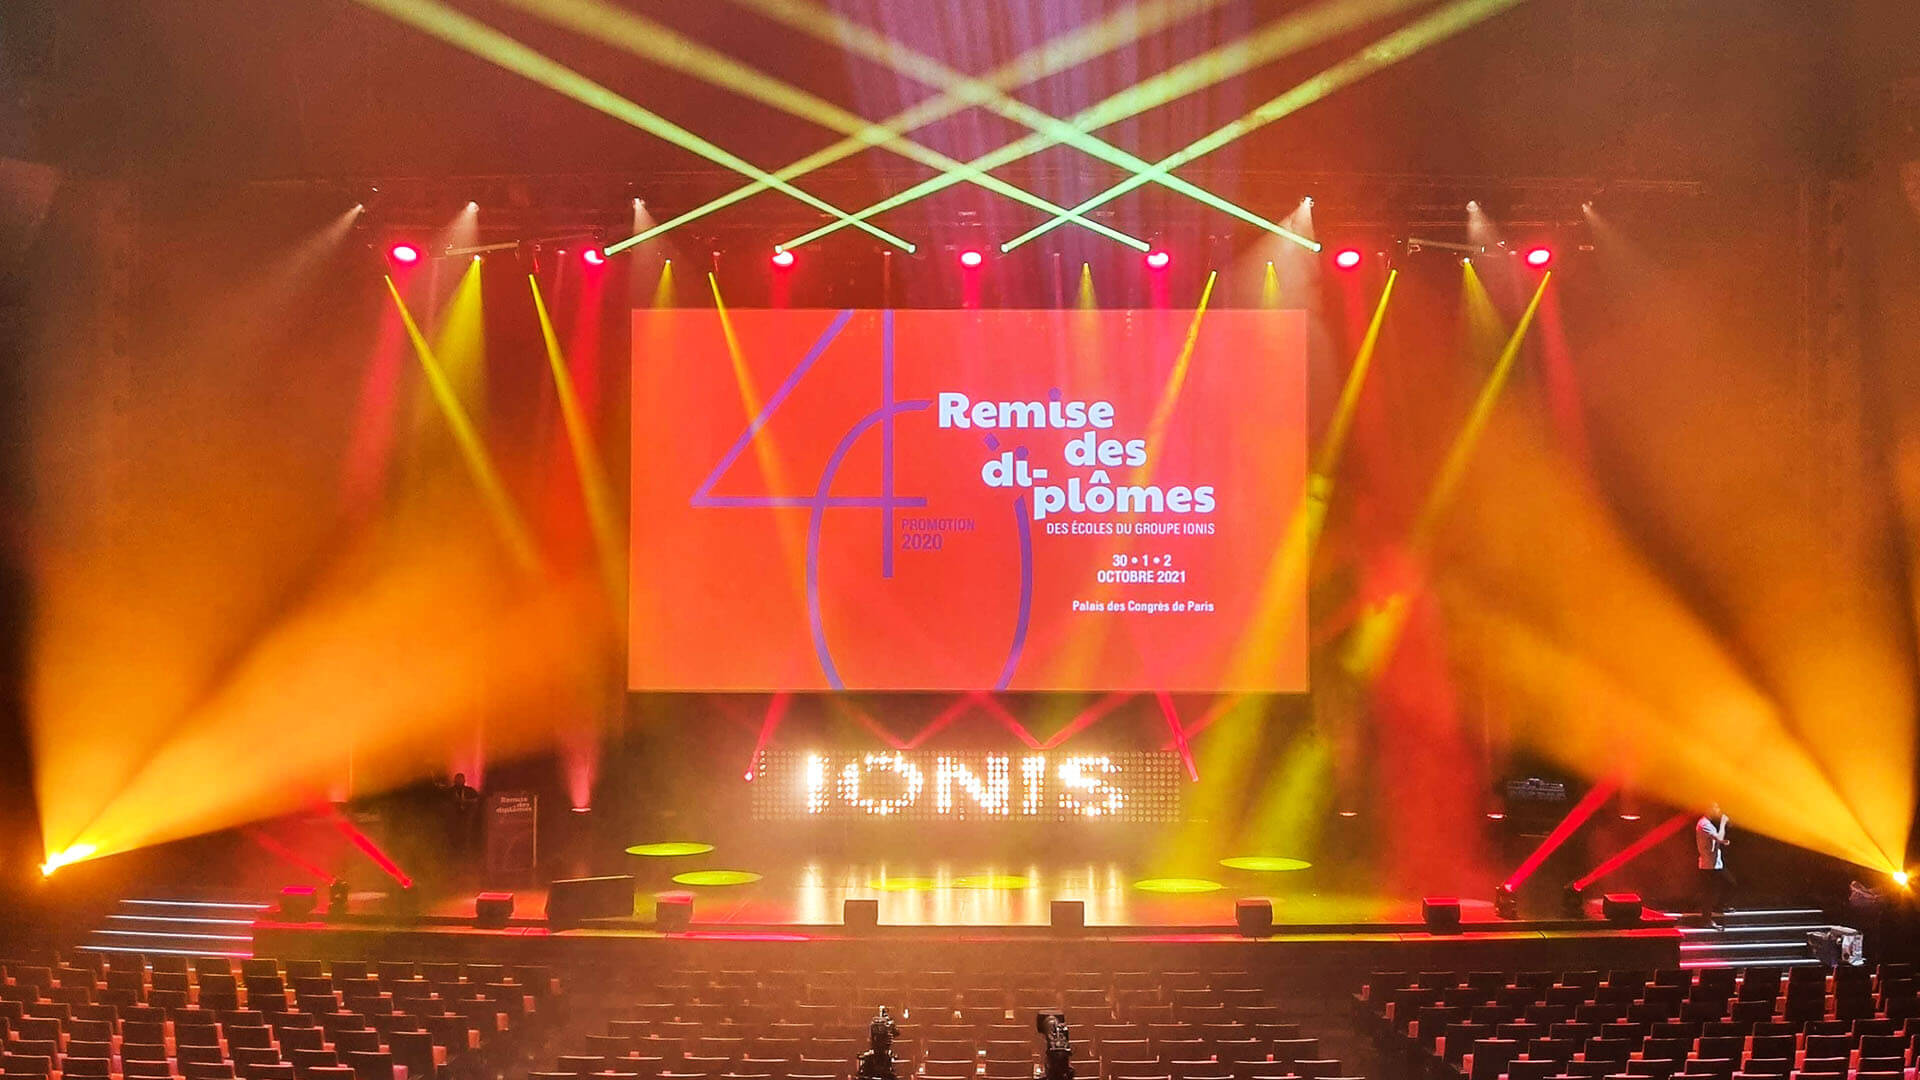 Hybrid graduation ceremony of 17 schools of the Groupe IONIS in the Palais des Congrès in Paris